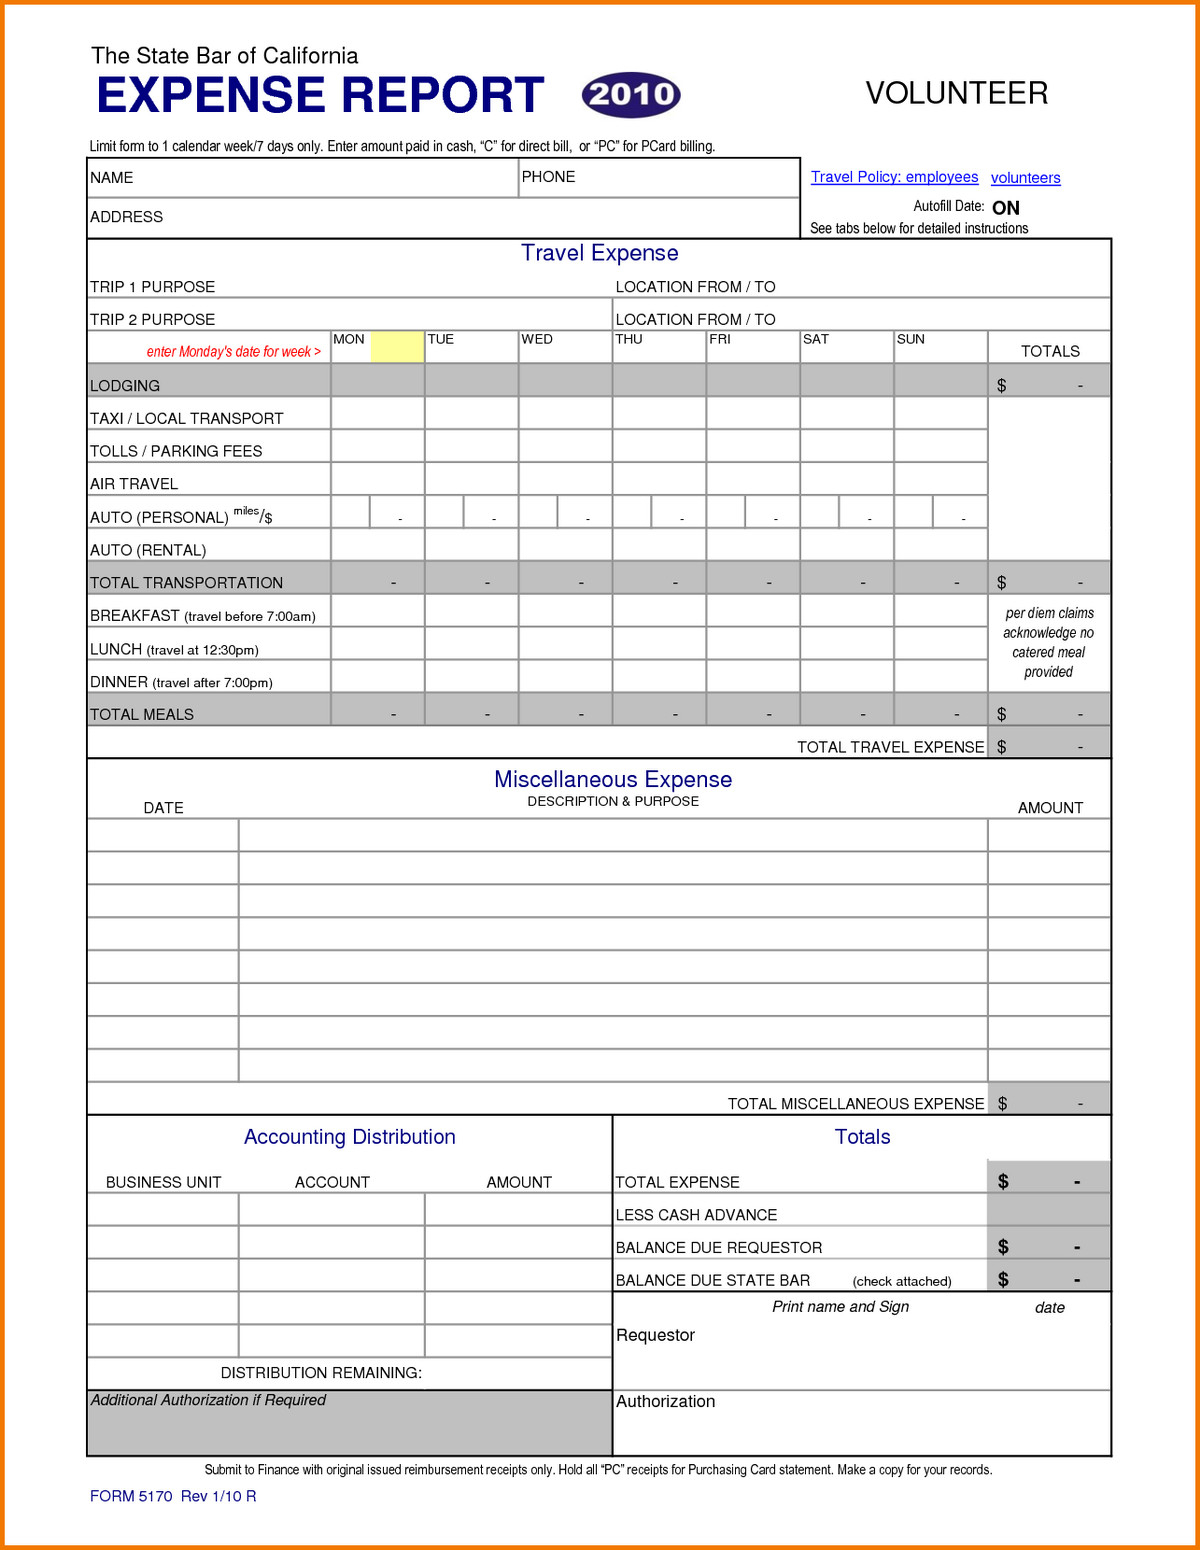 business-trip-expenses-template-travel-expense-report-form-doctemplates